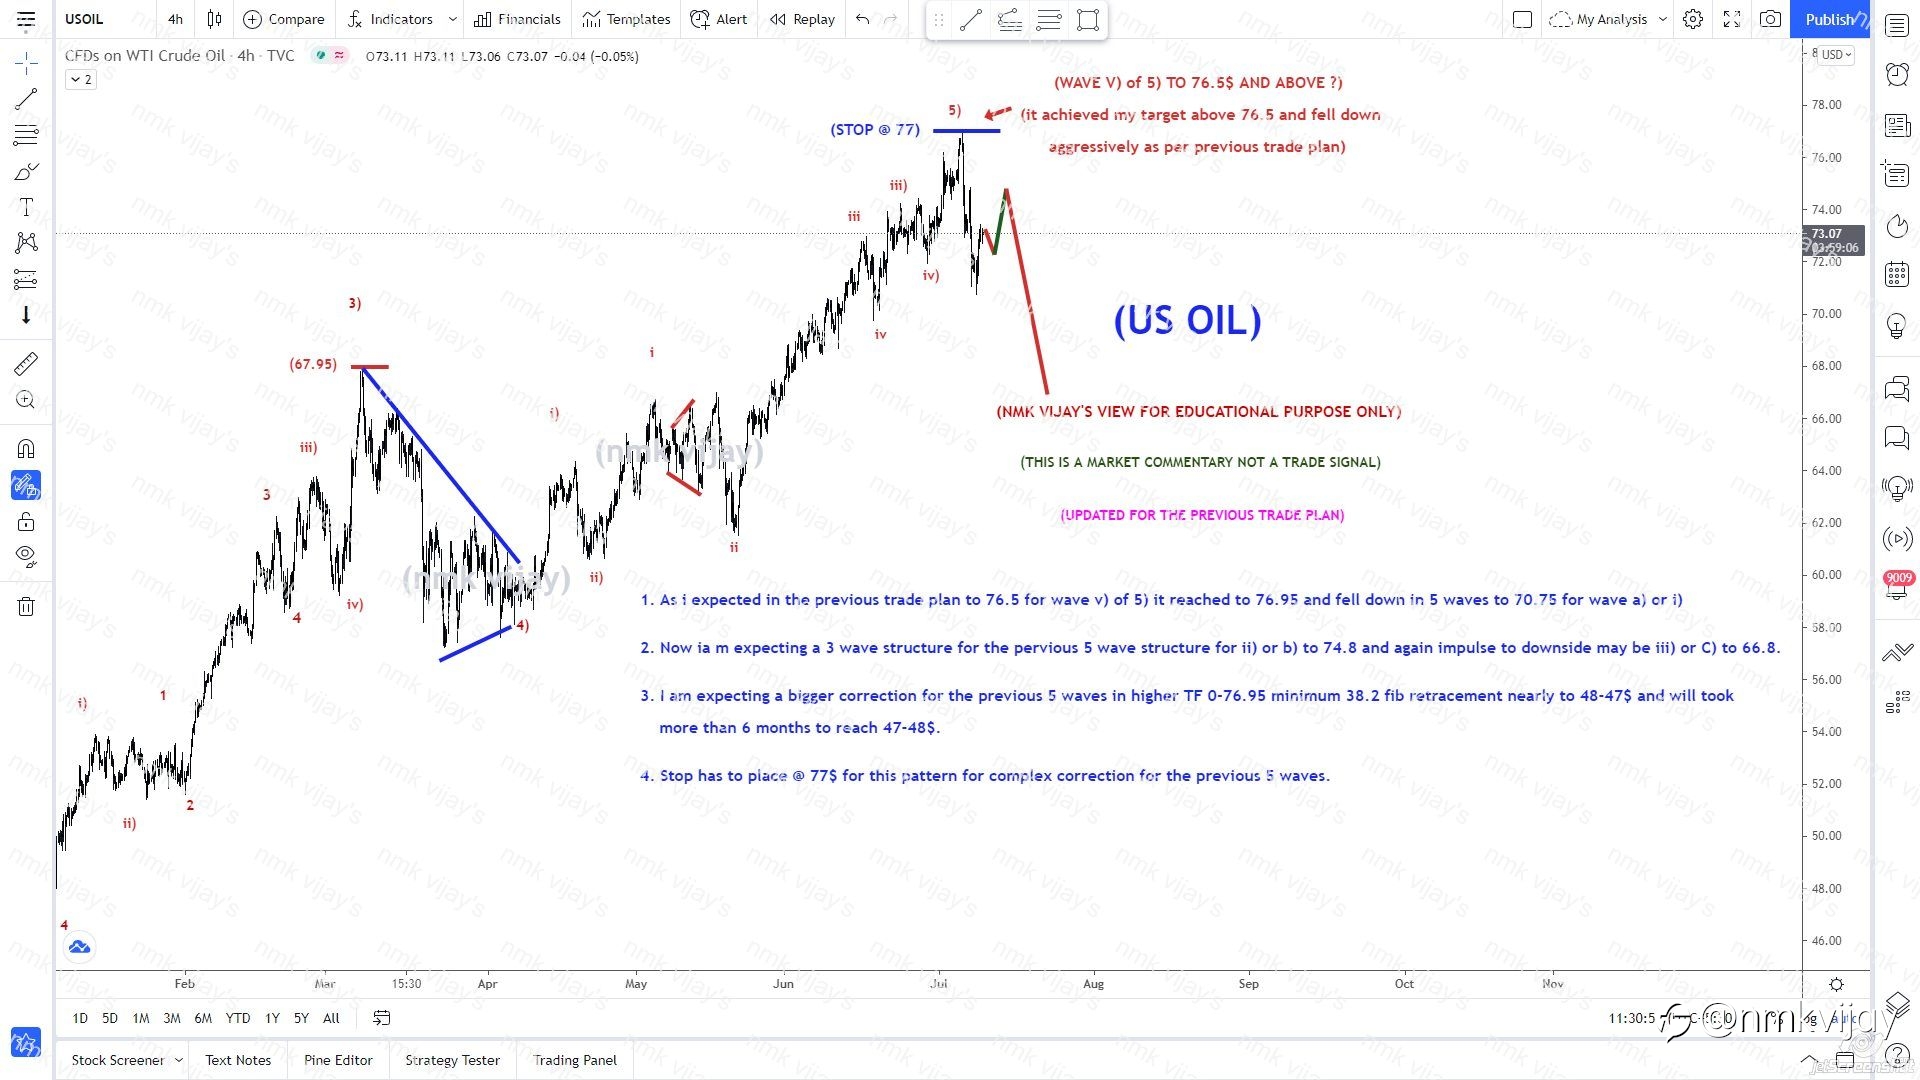 USOIL-5 waves from 0-76.95 completed, now bigger correction...